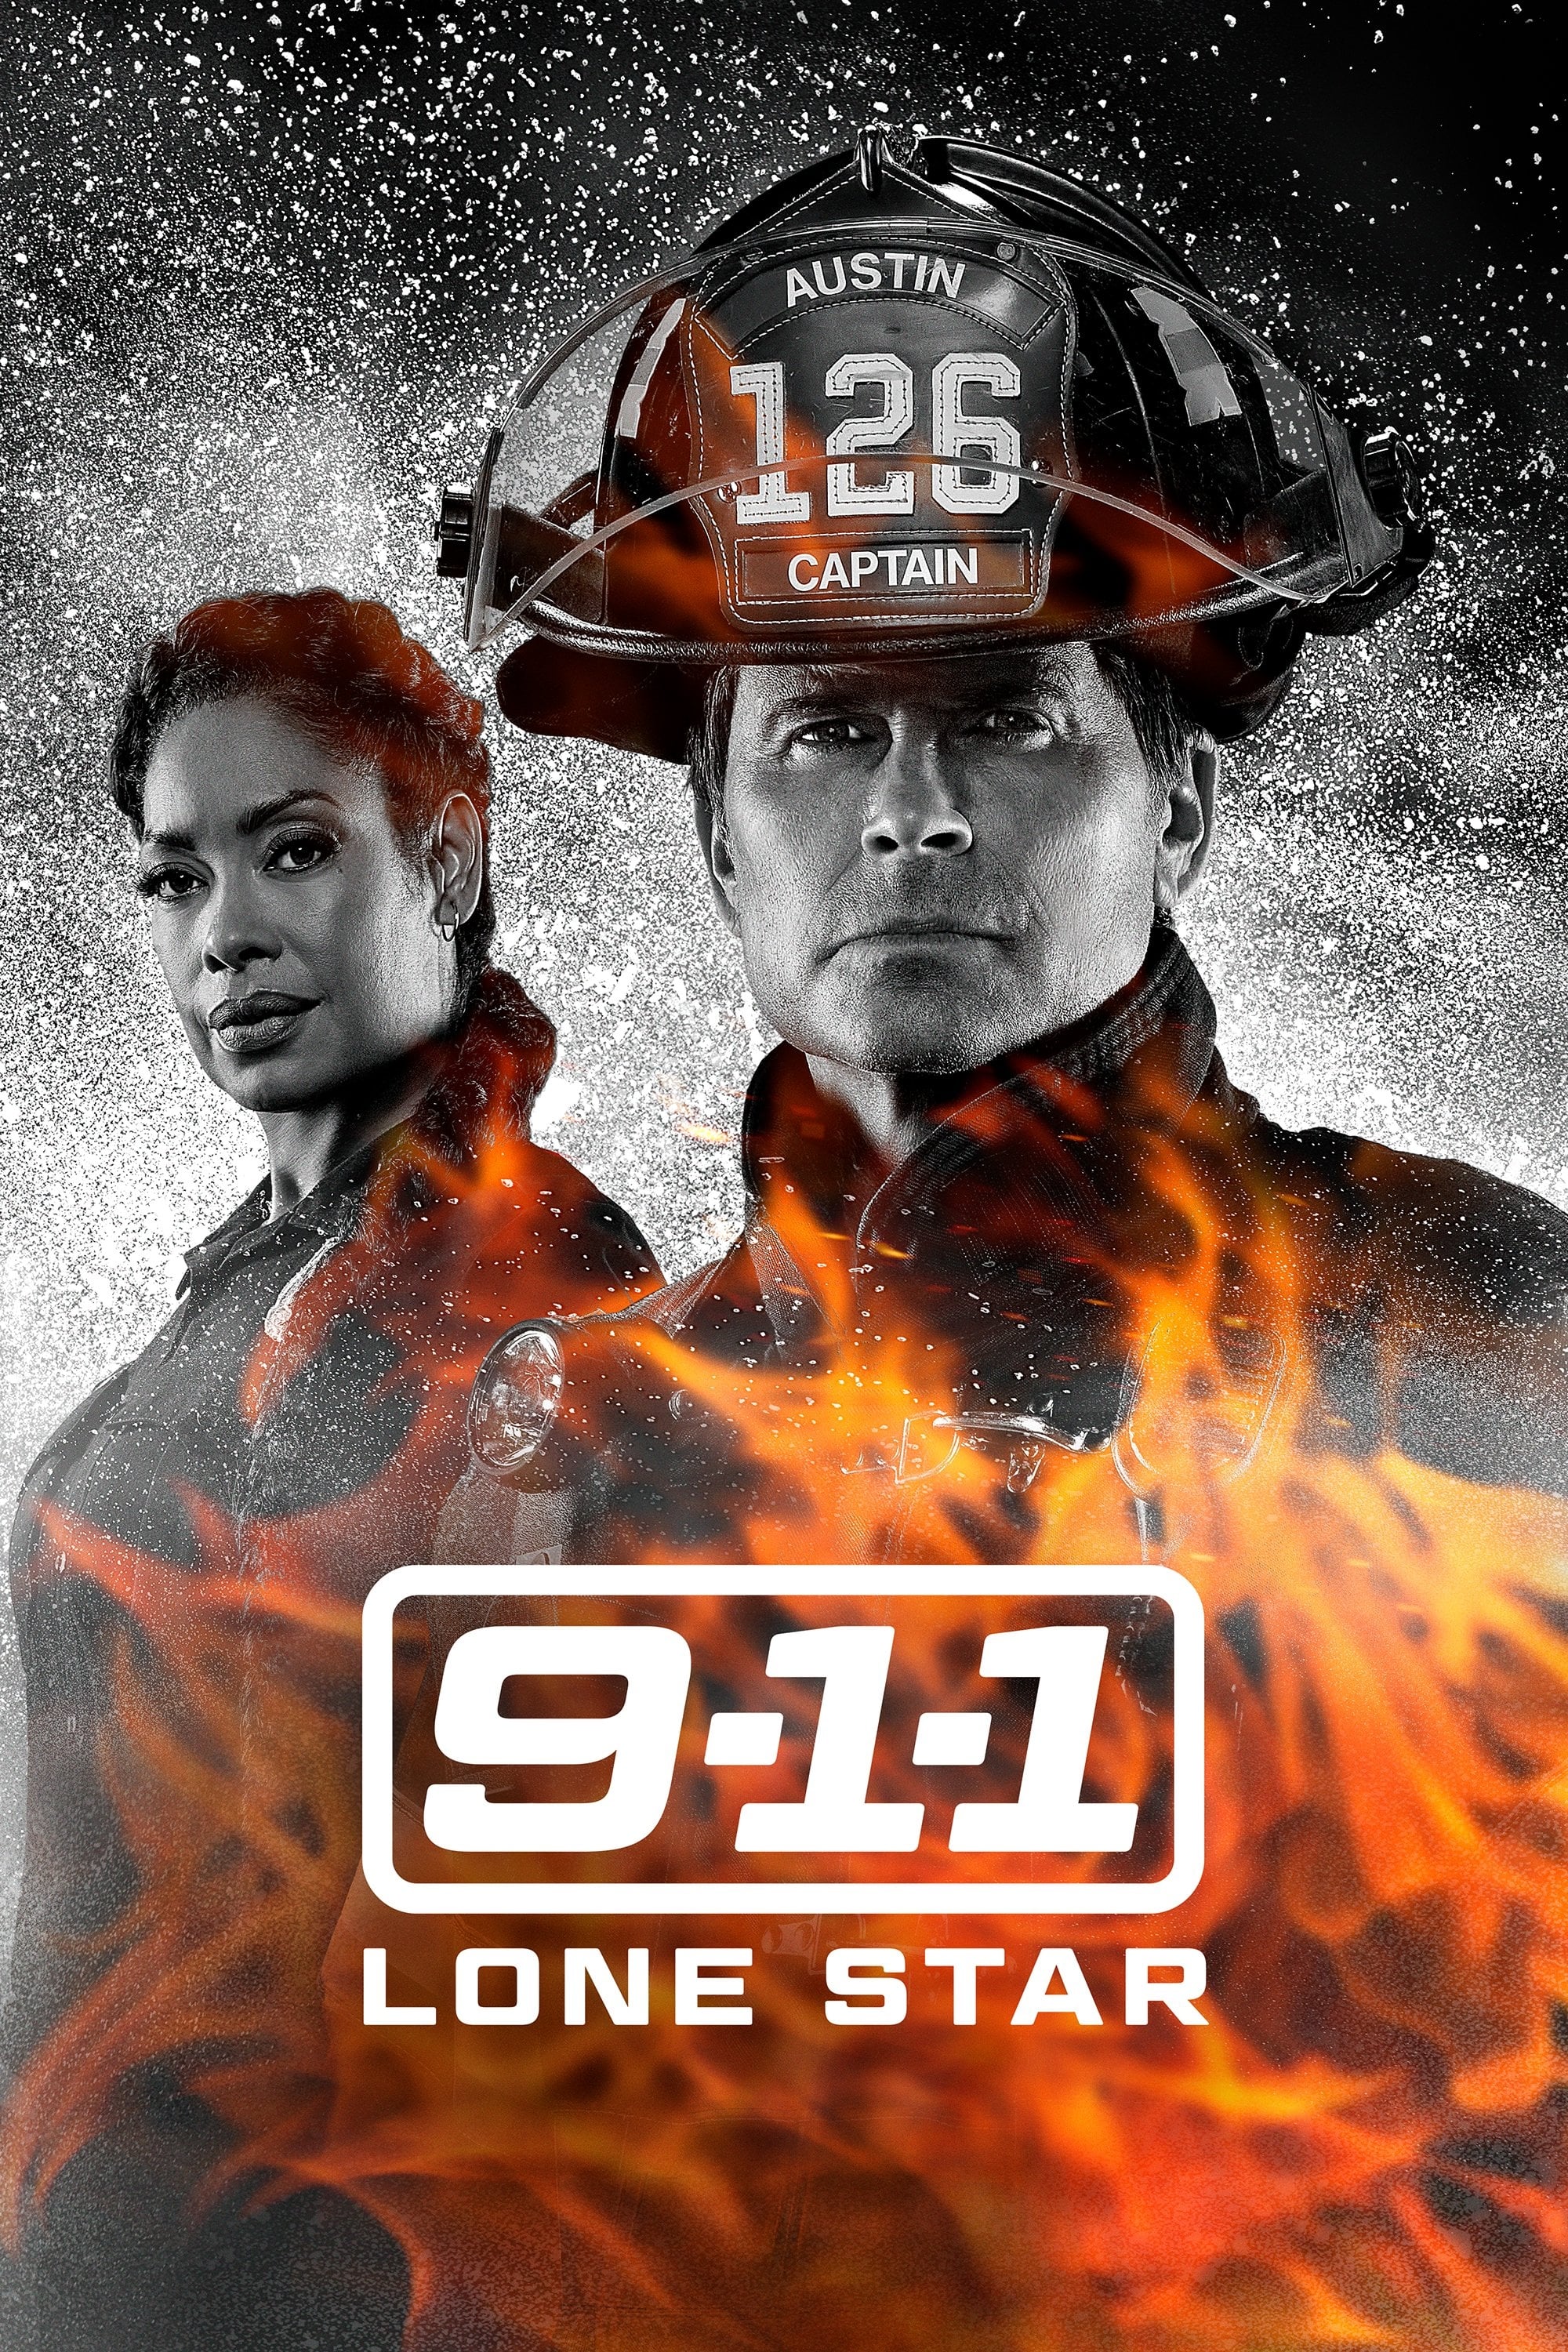 9-1-1: Lone Star TV Shows About Fire